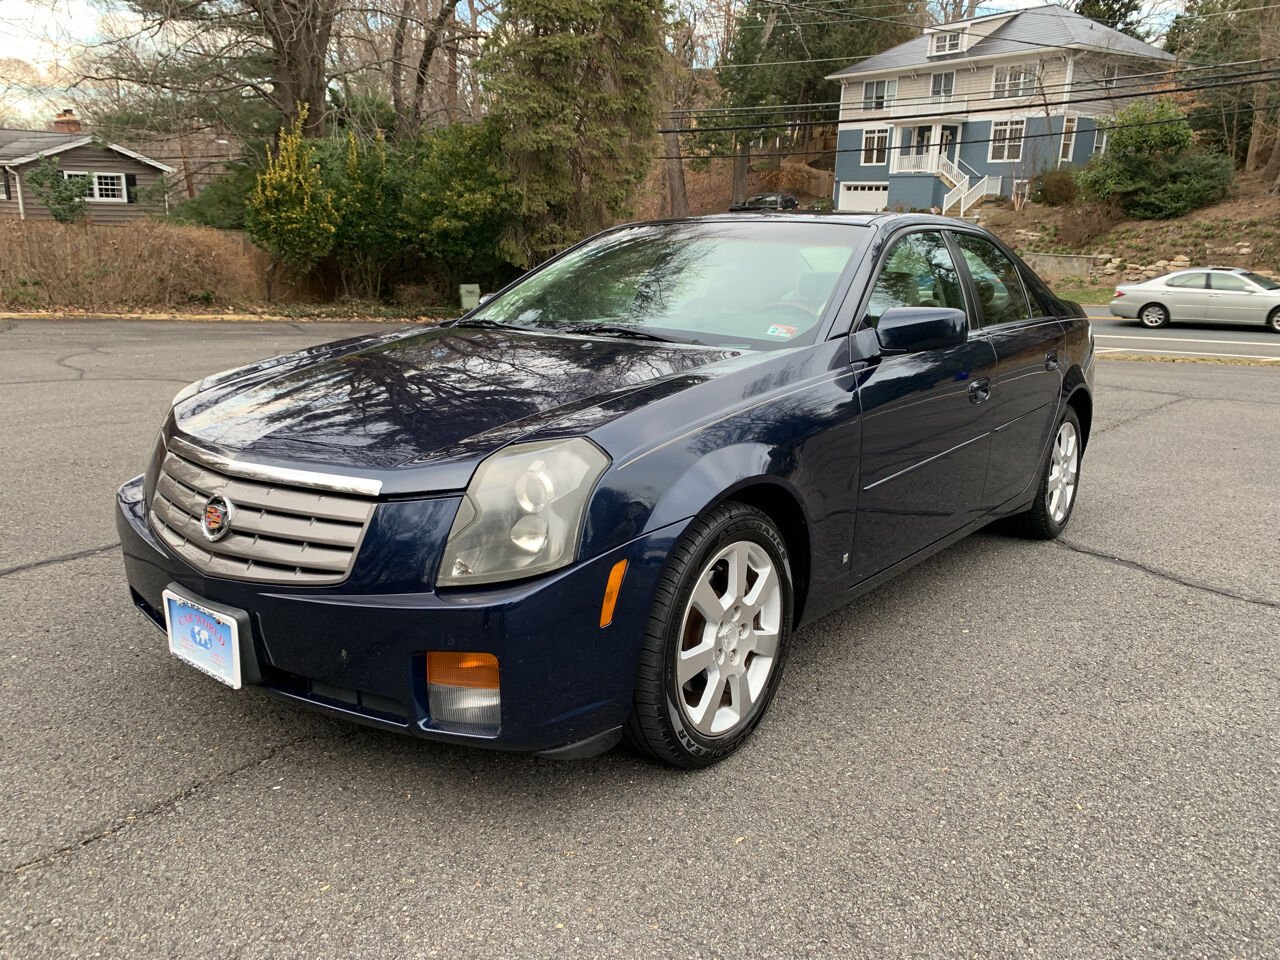 2006 Cadillac CTS For Sale - Carsforsale.com®